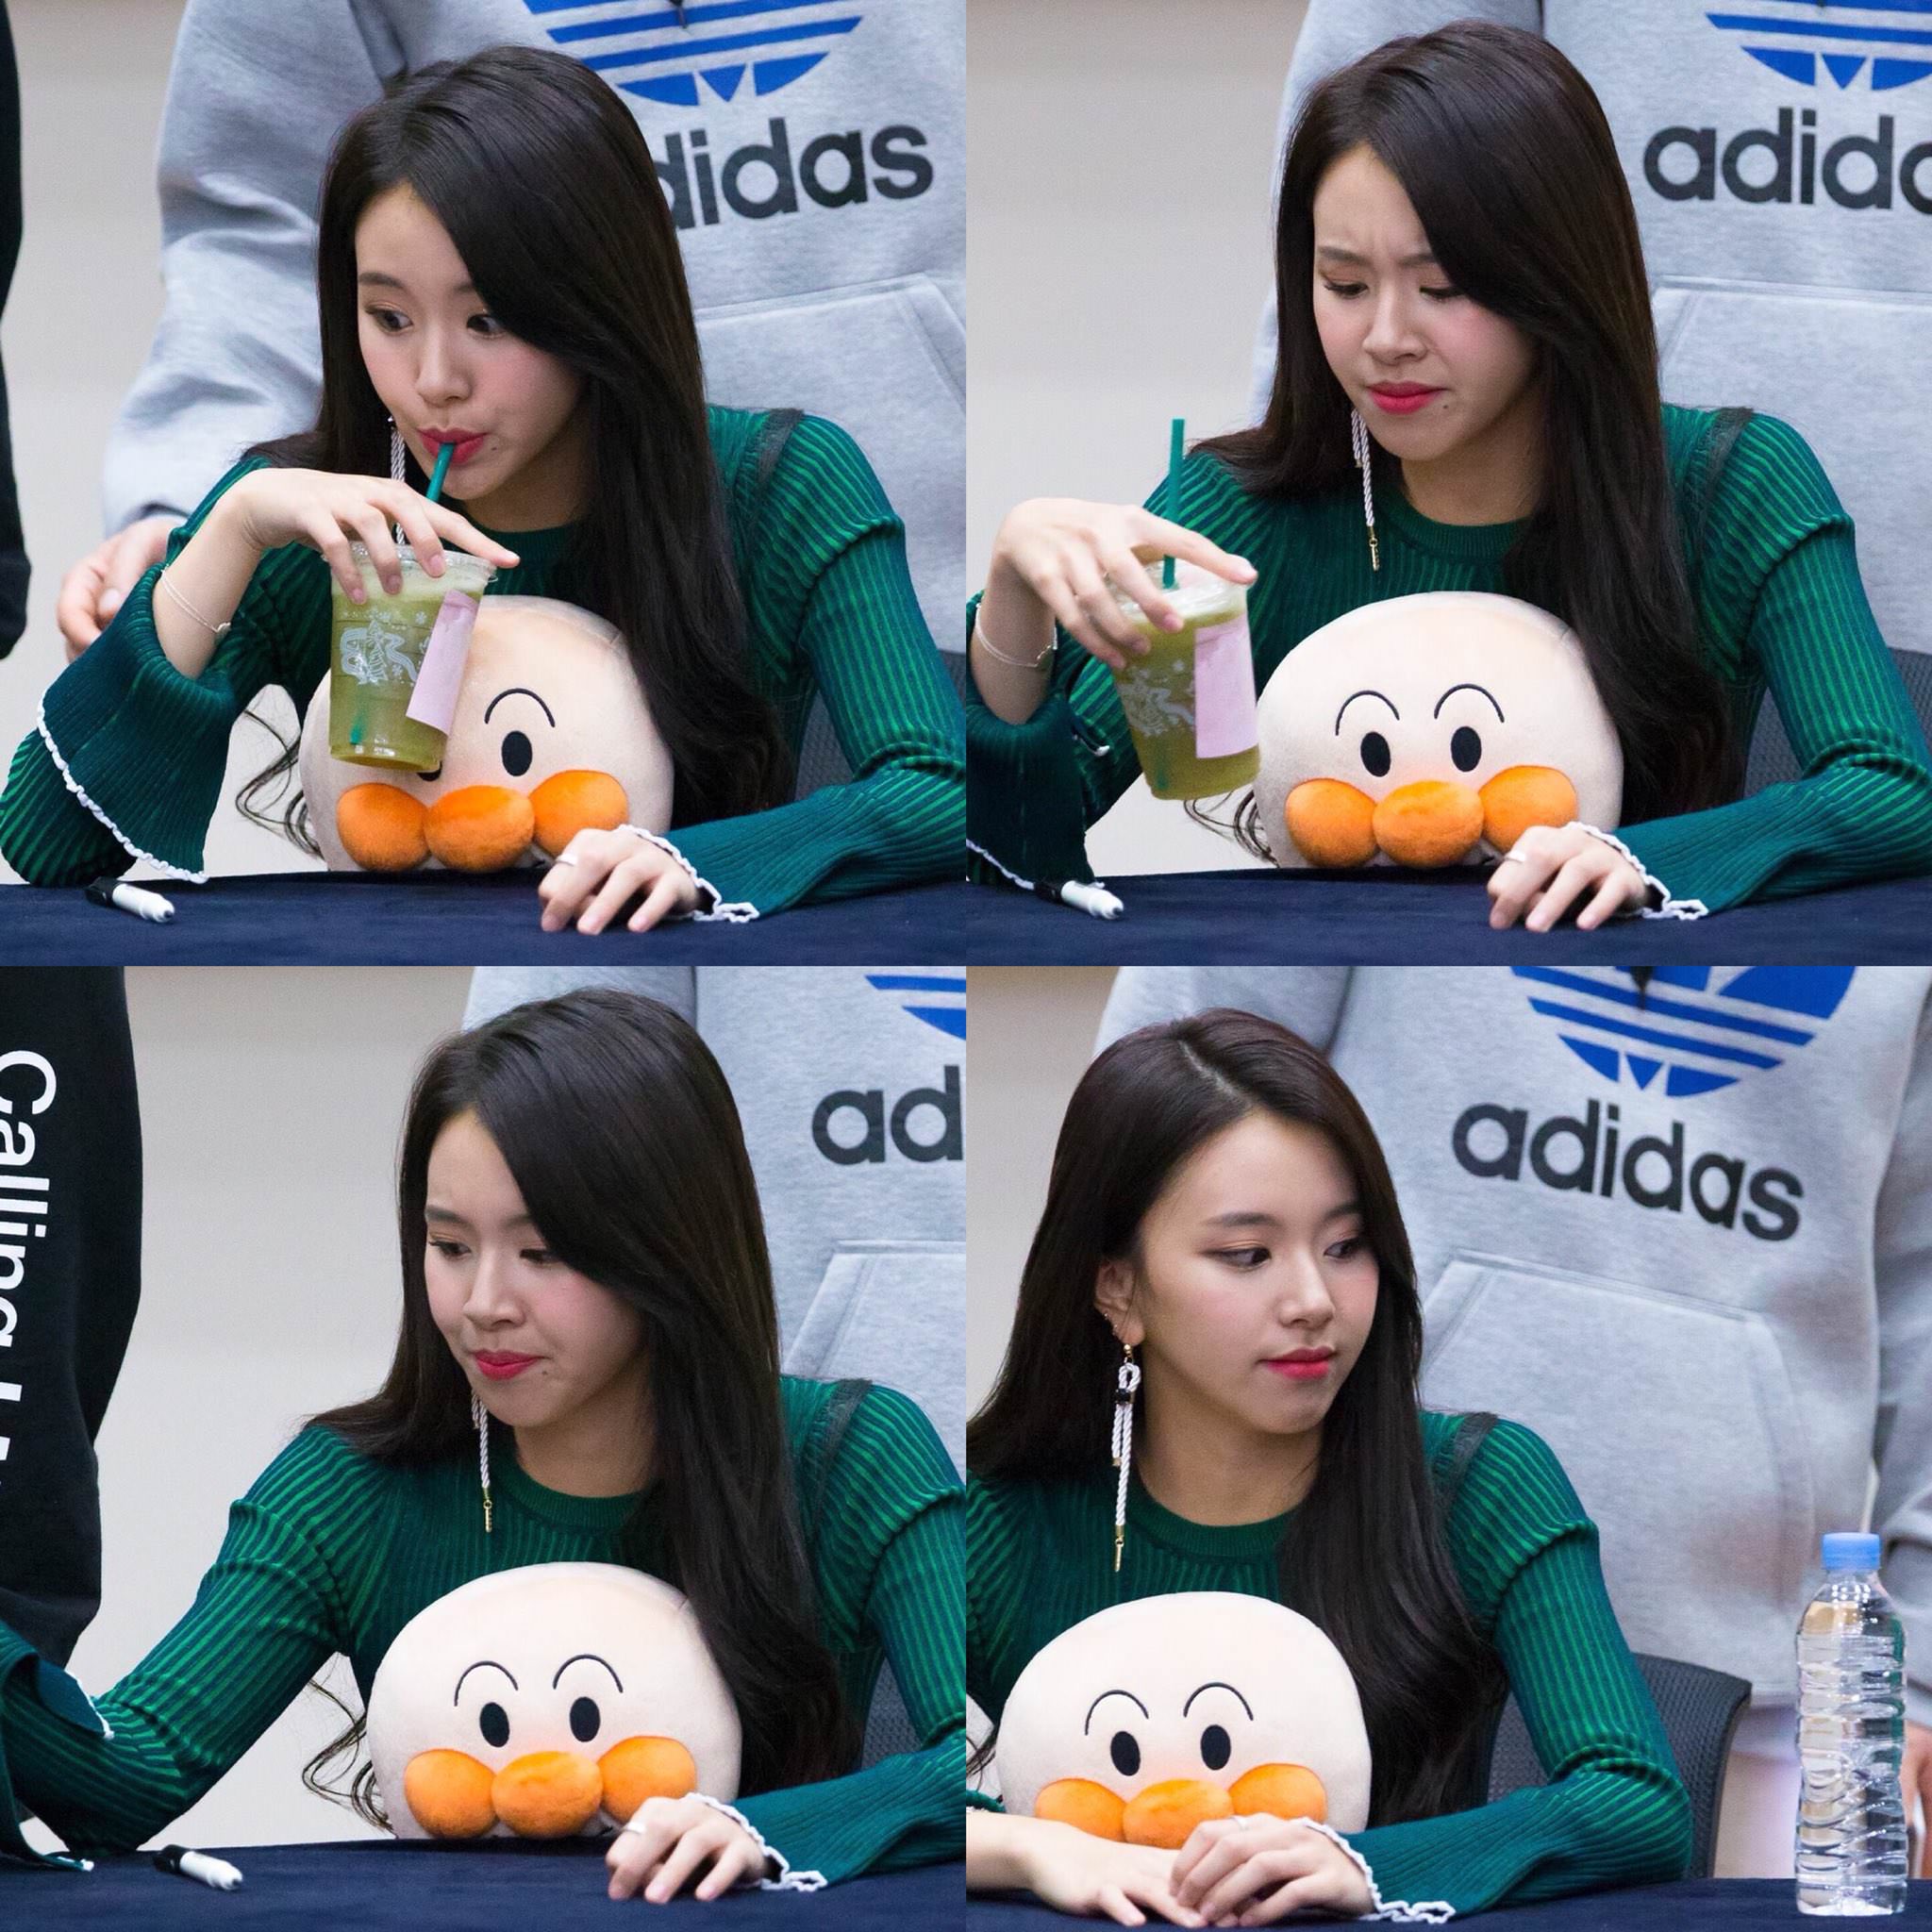 Chaeyoung Drinking Template - Asian, Drink, Drinking, Water - Boire Boisson Asiat.jpg